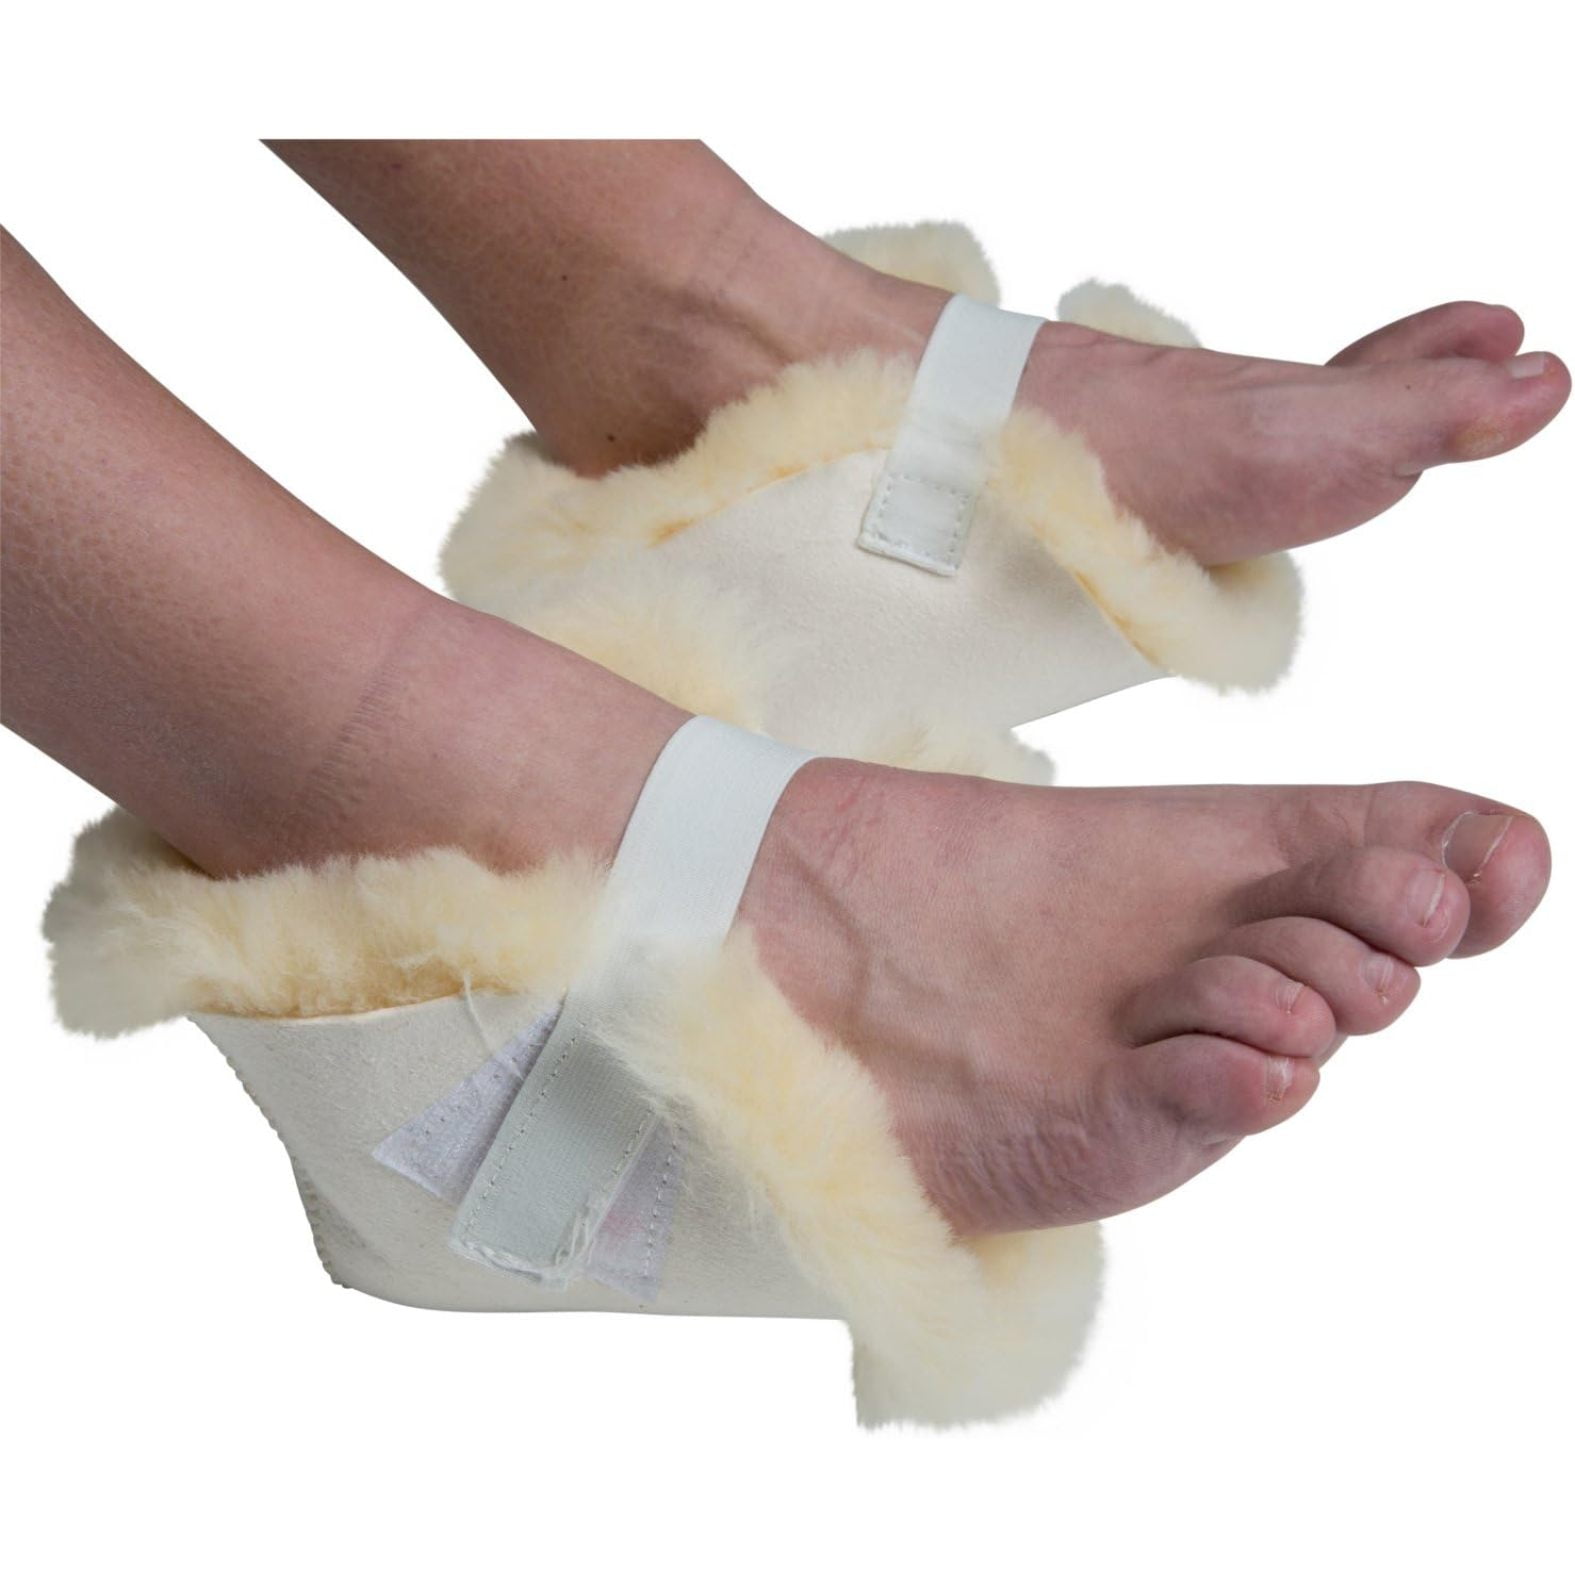 SOFT ANTI-BEDSORE HEEL PROTECTOR | SOFT ANTI-BEDSORE PROTECTORS